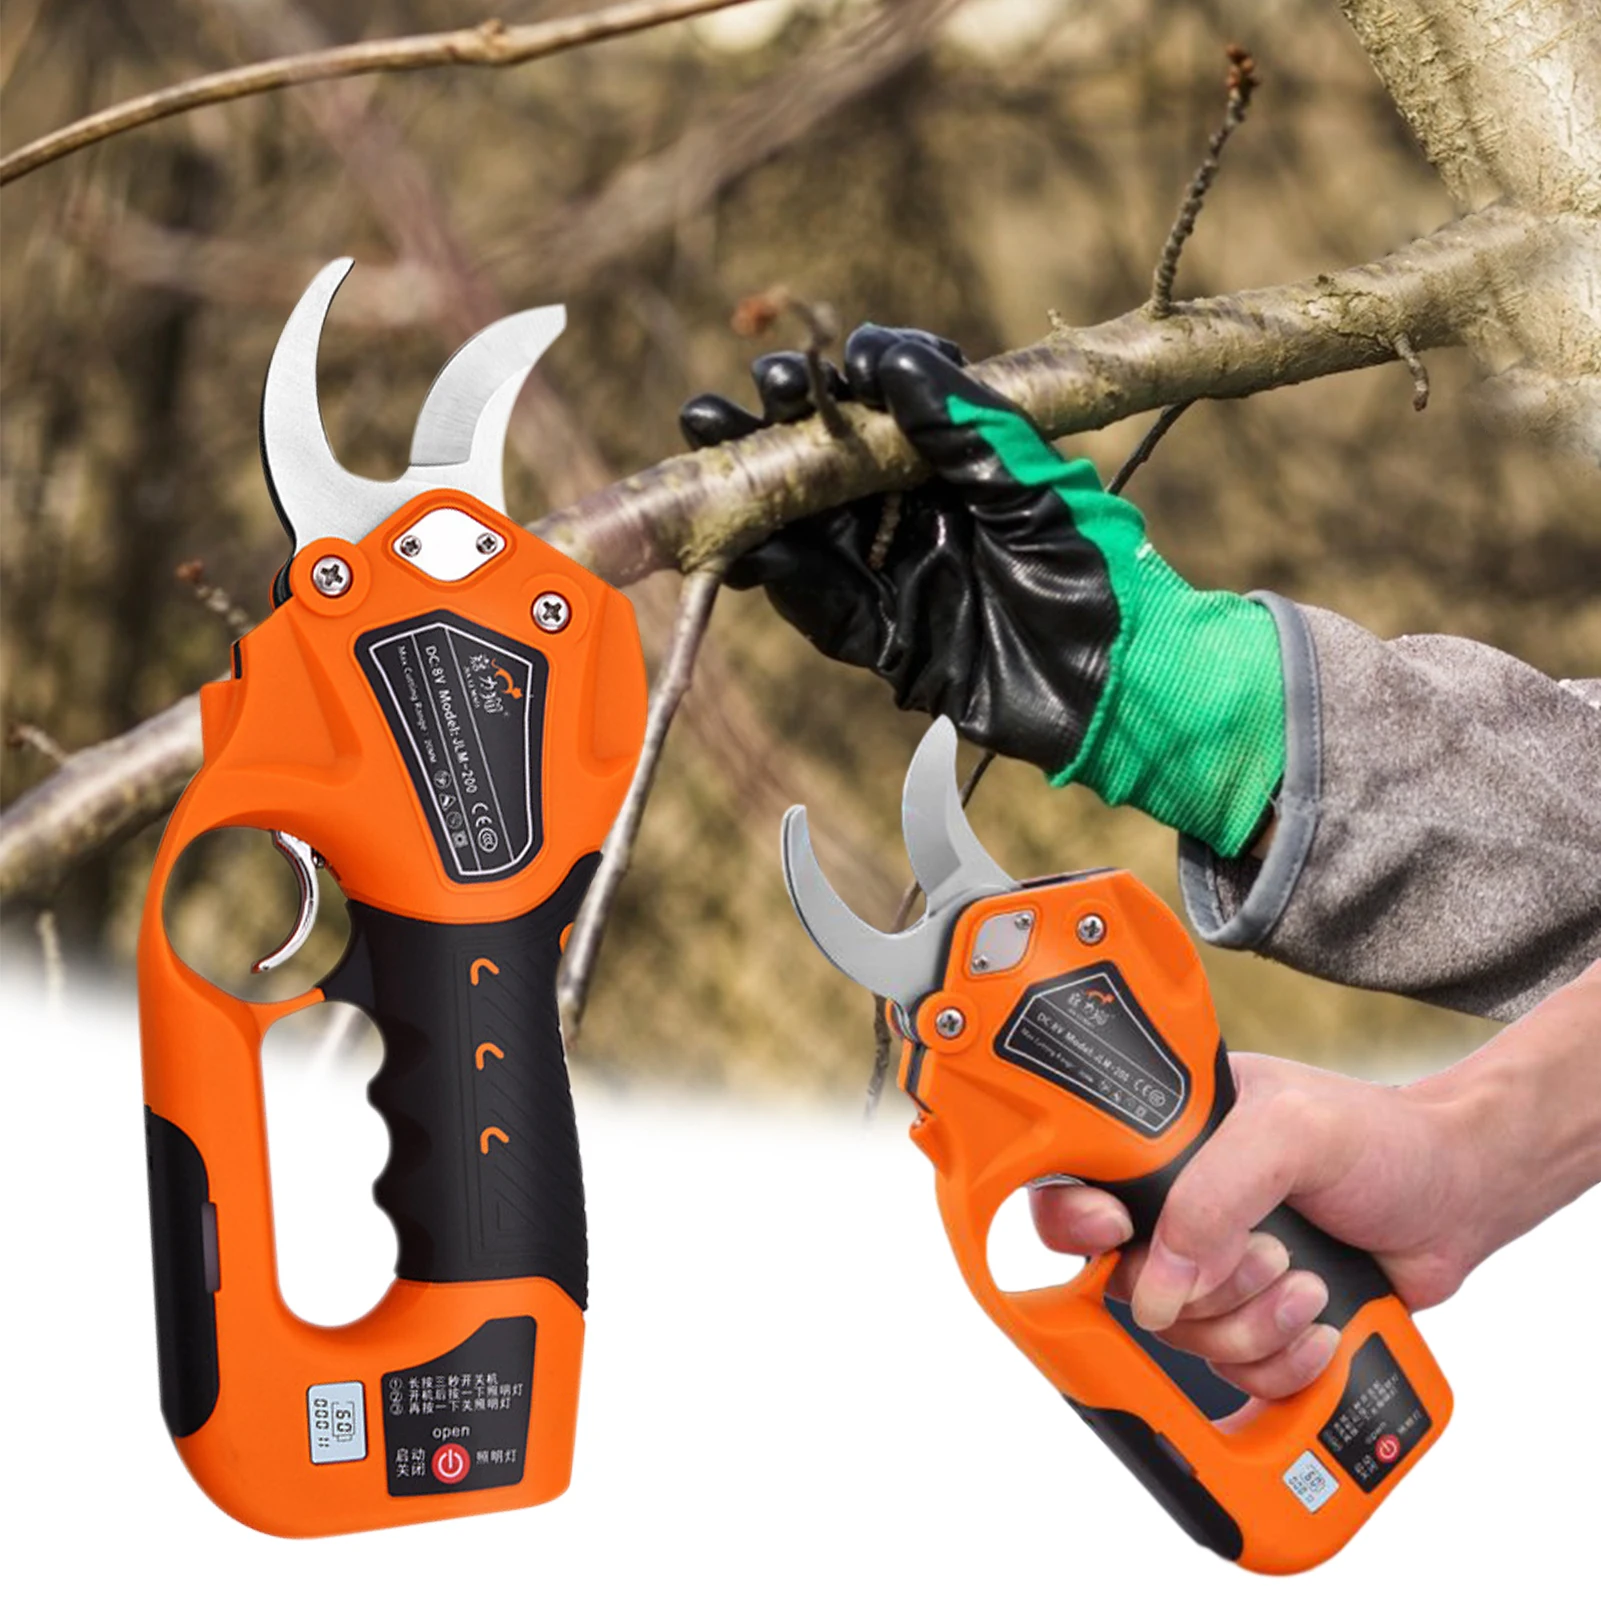 16.8/21V Cordless Pruner Lithium-ion Pruning Shear Efficient Fruit Tree Bonsai Pruning Electric Tree Branches Cutter Landscaping